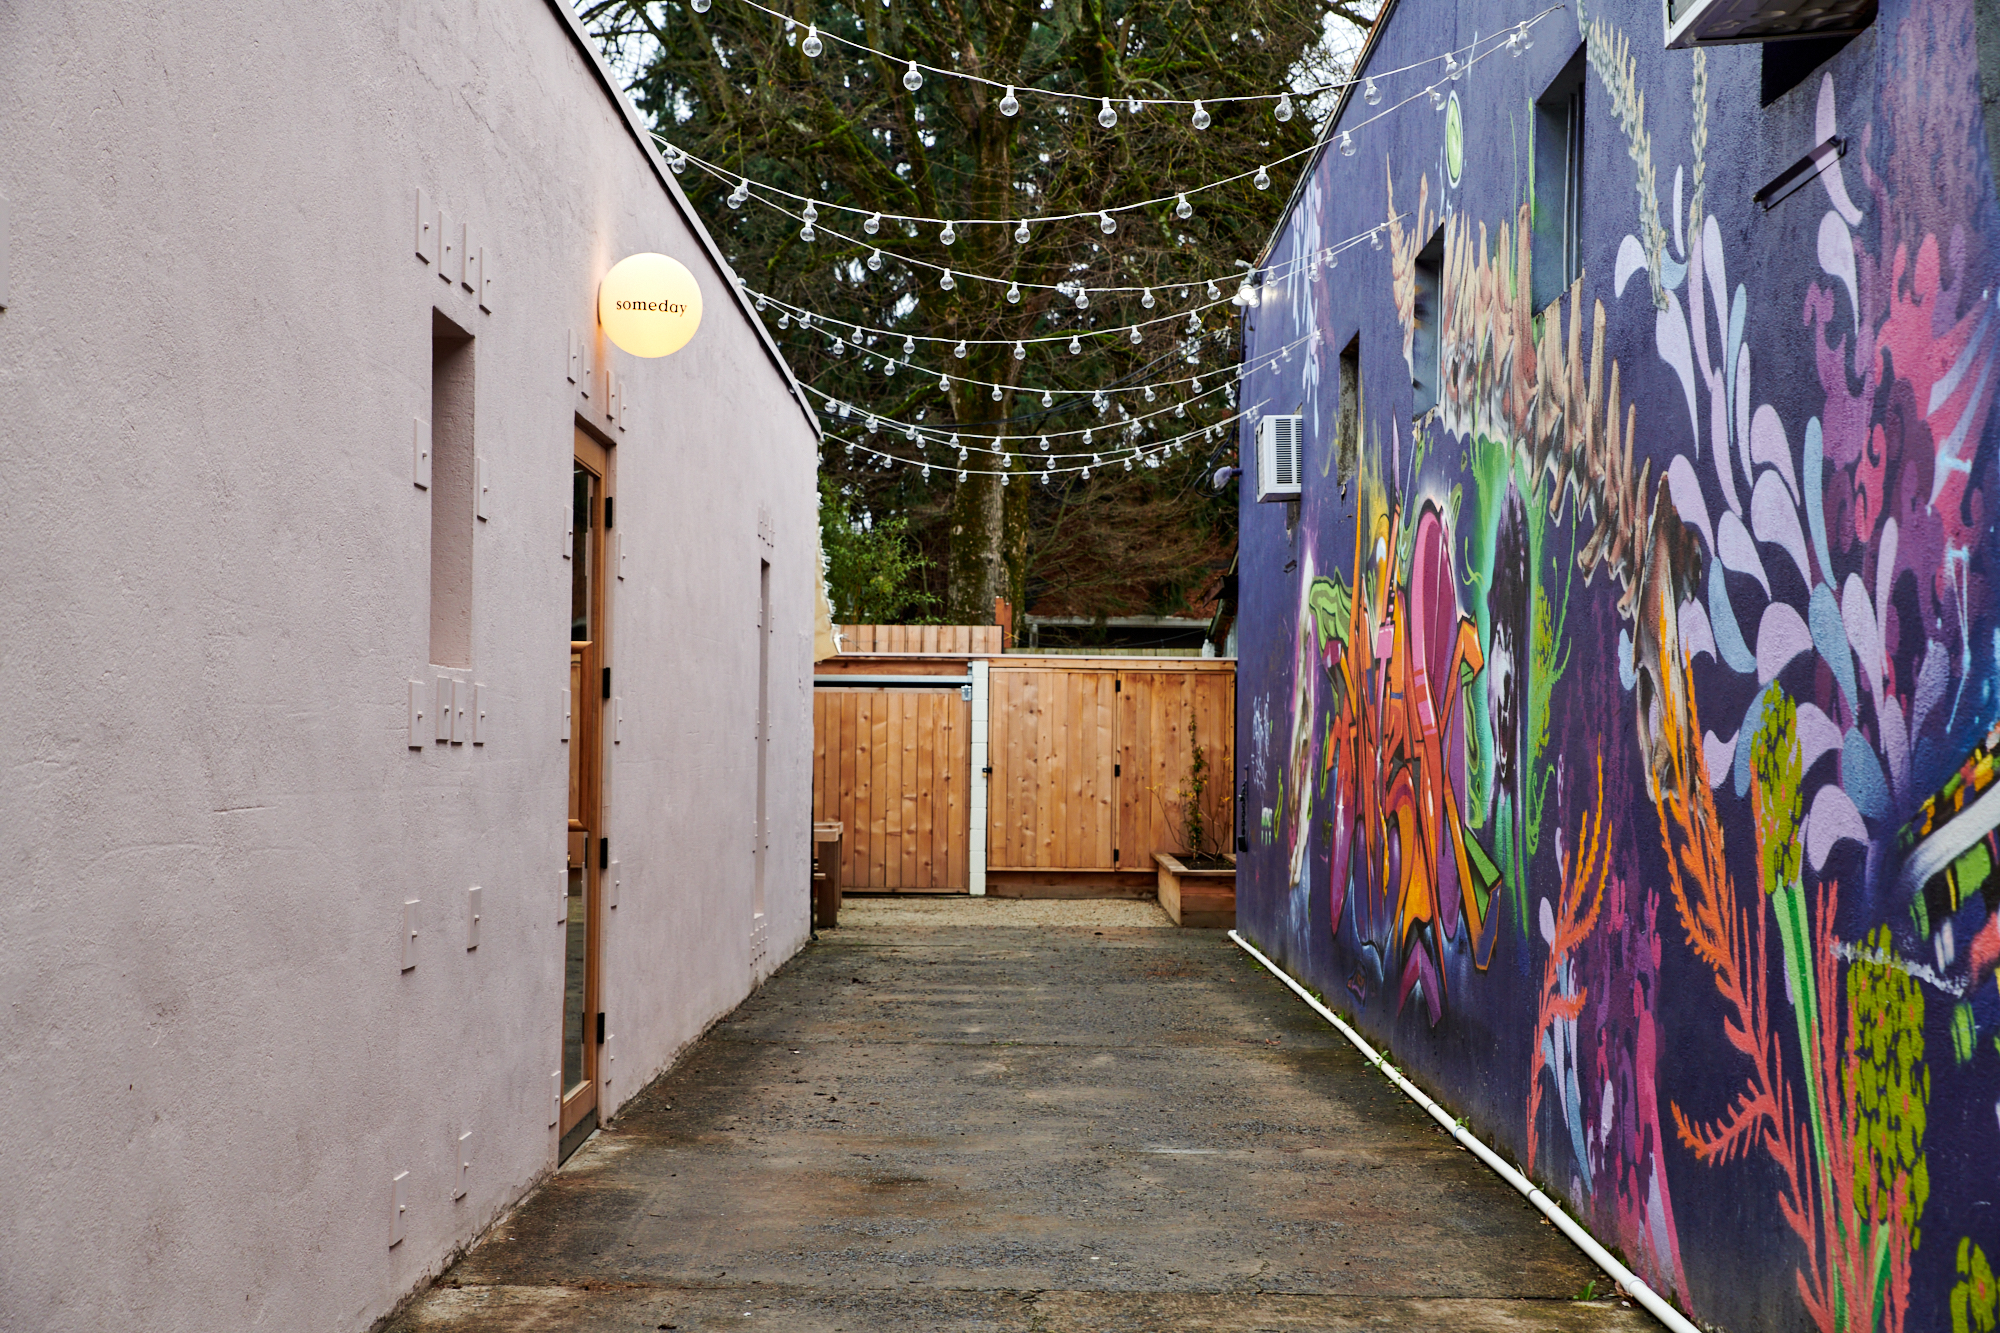 A colorful alleyway marks the way to Someday